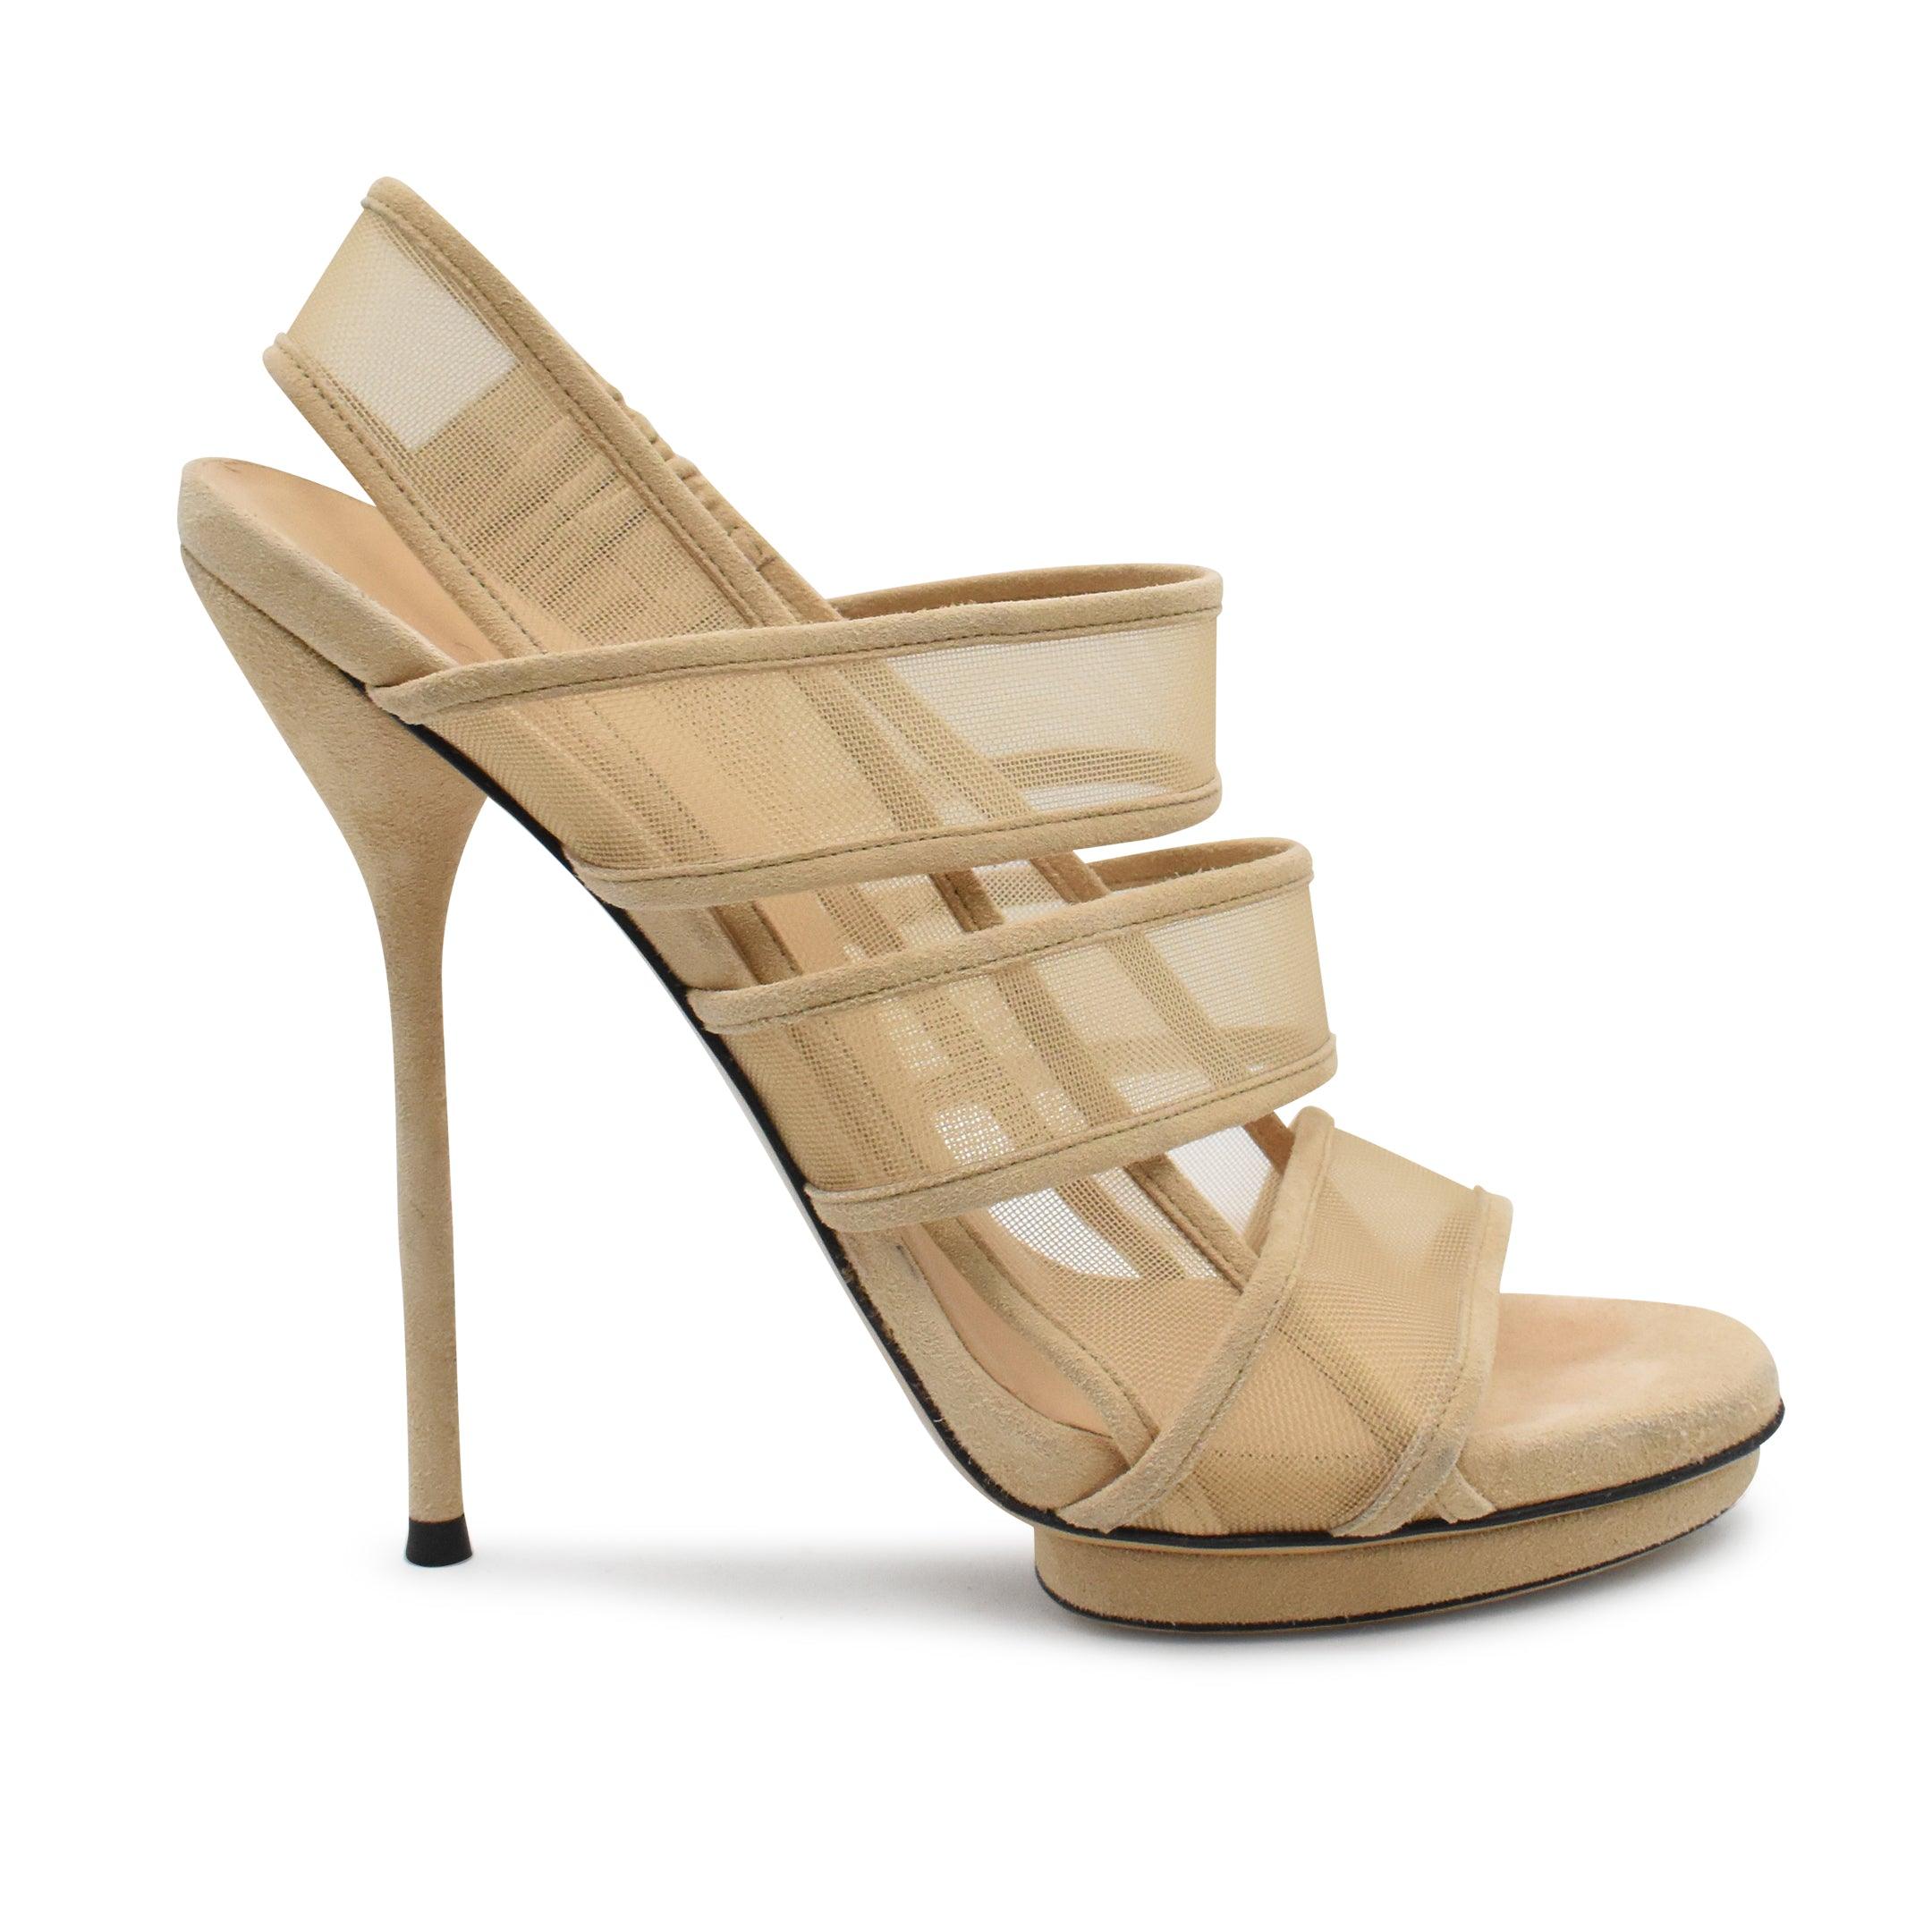 Gucci Heels - Women's 36.5 - Fashionably Yours